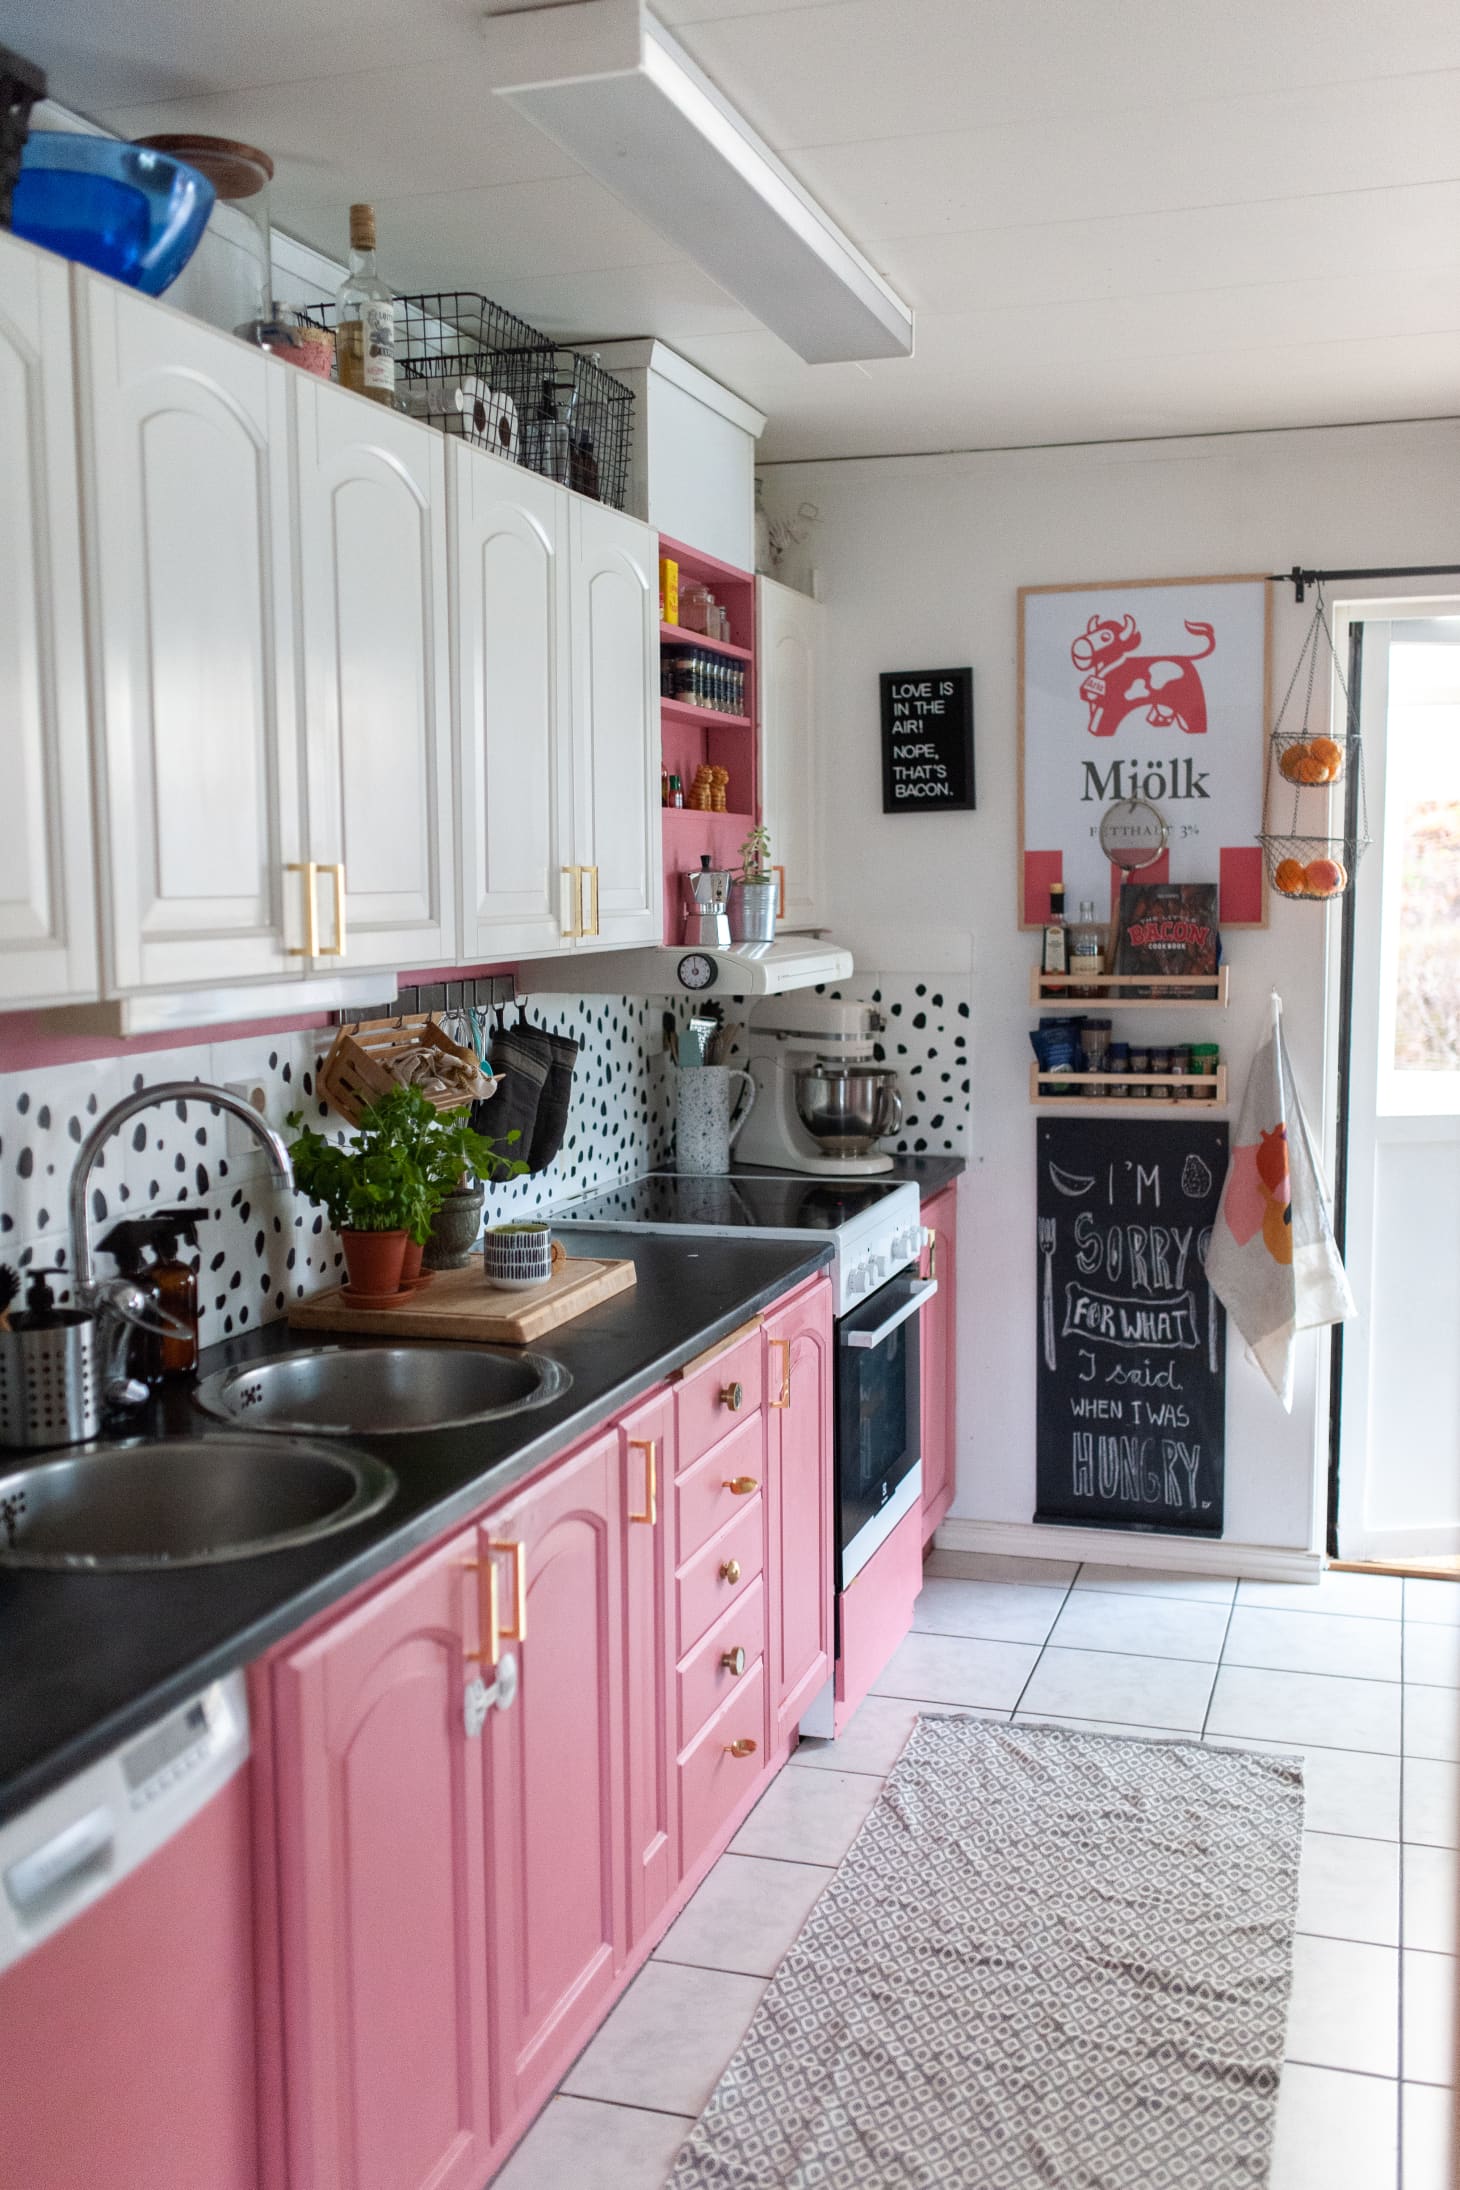 This Swedish Home Has the Most Glorious Pink Kitchen  Kitchn